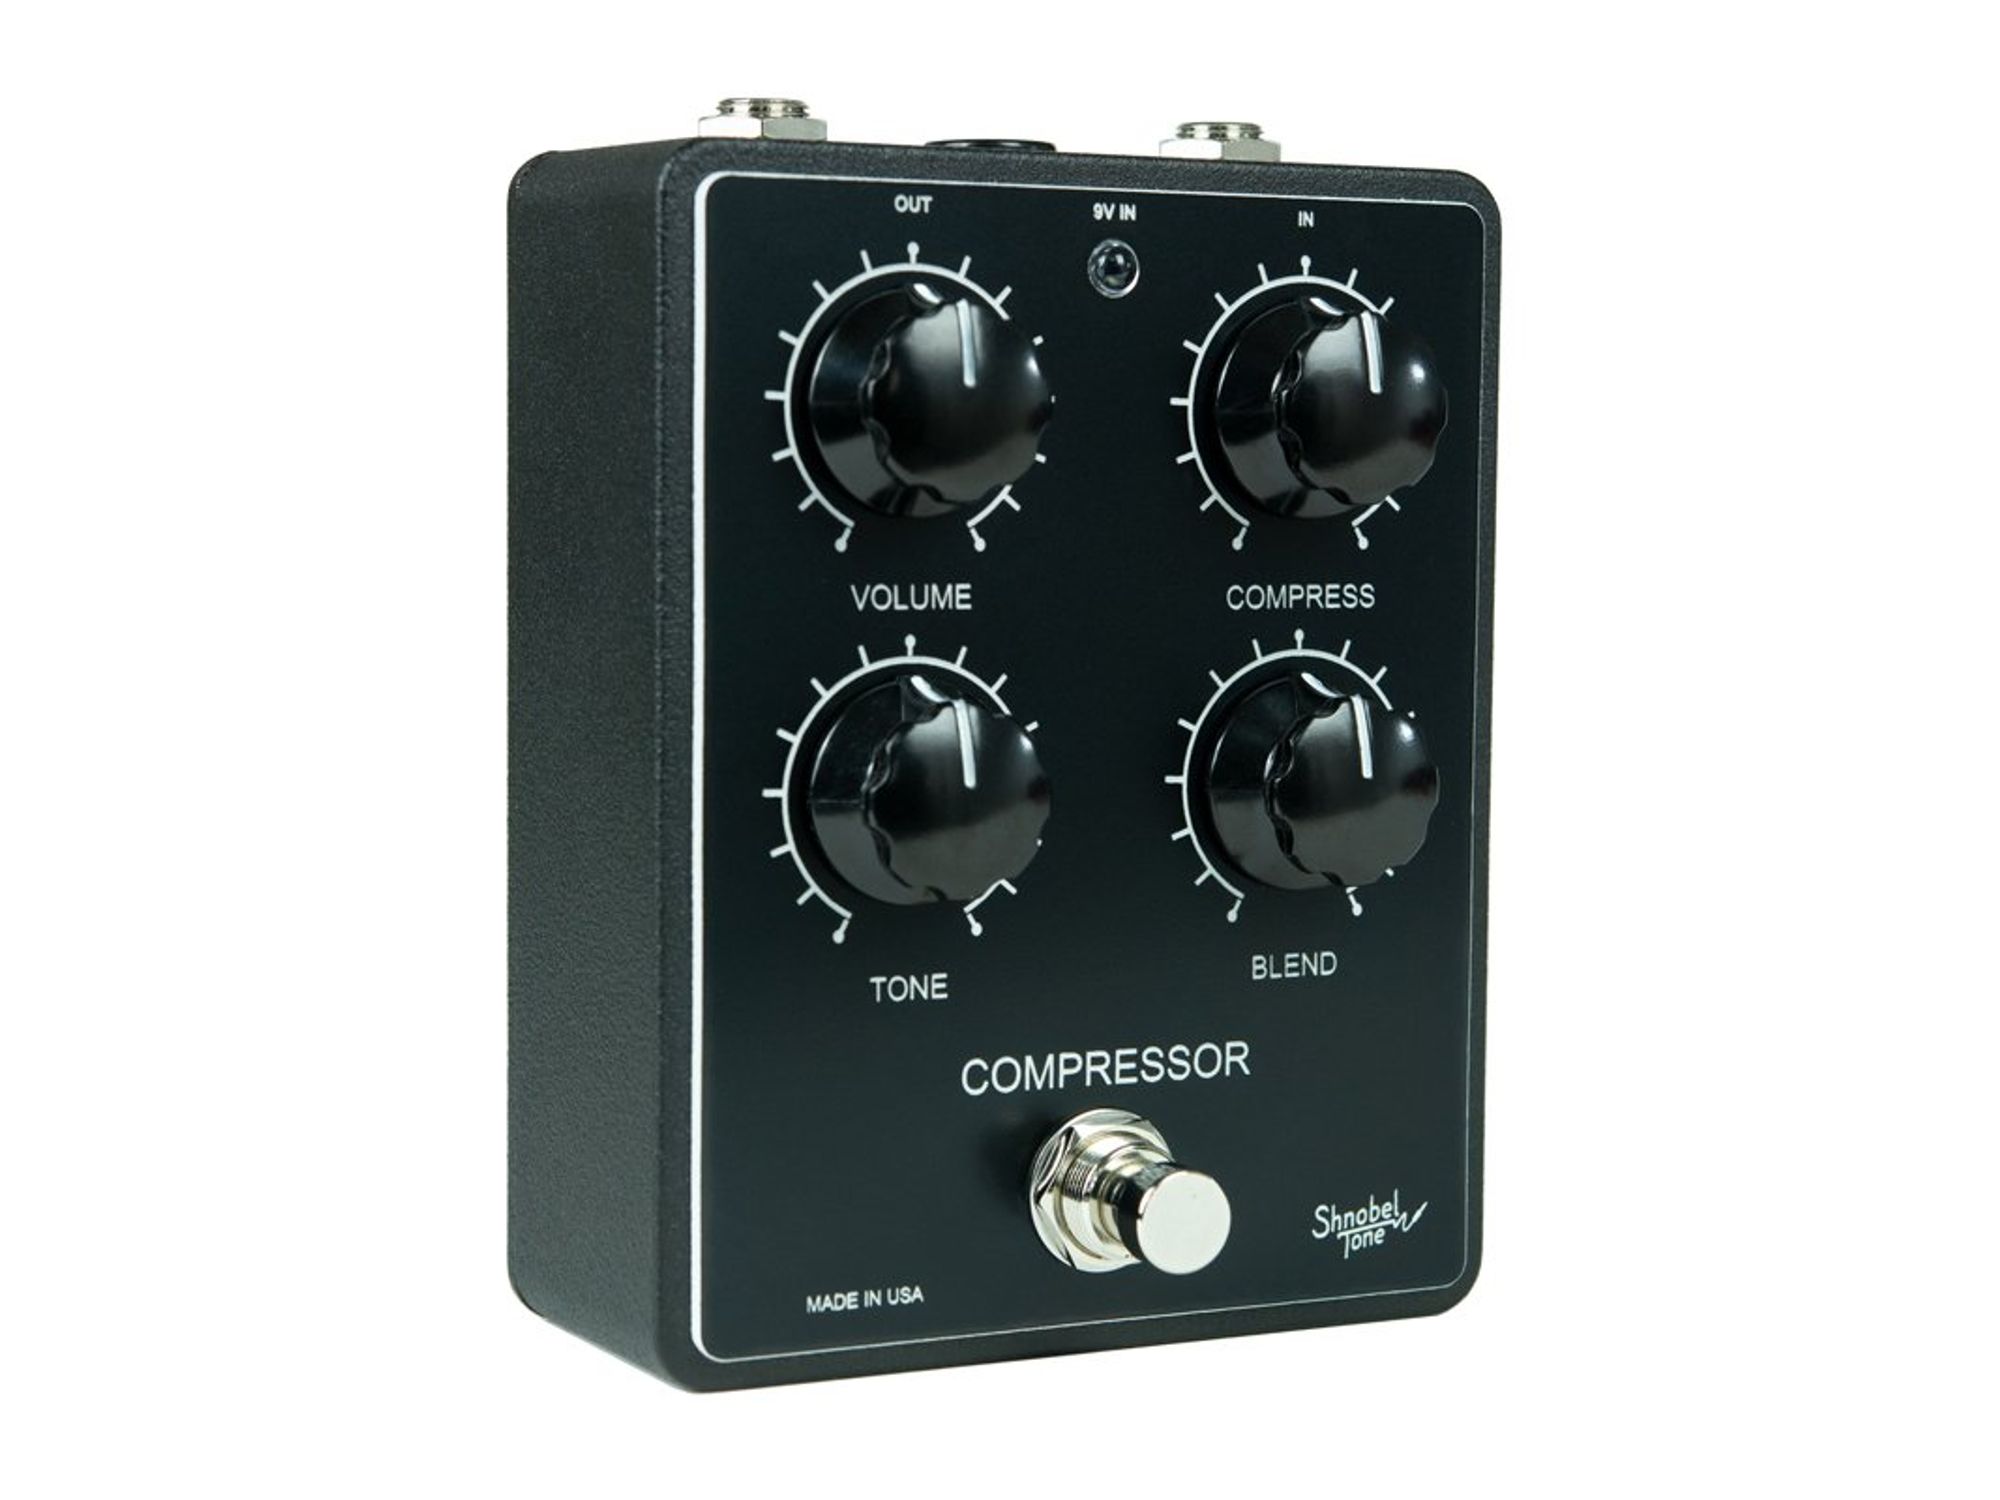 Shnobel Tone Introduces Their First Compressor Pedal